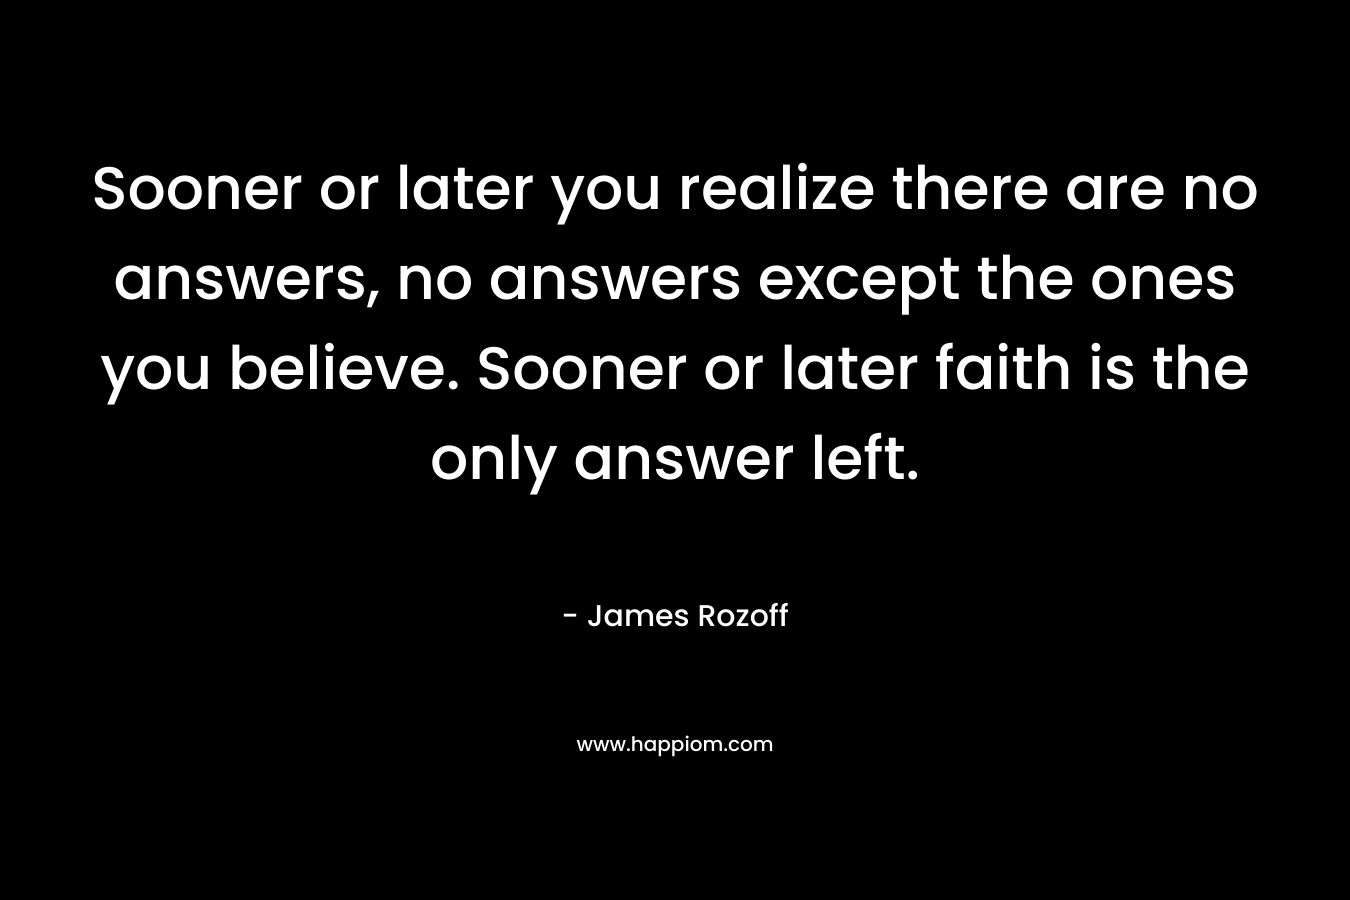 Sooner or later you realize there are no answers, no answers except the ones you believe. Sooner or later faith is the only answer left.